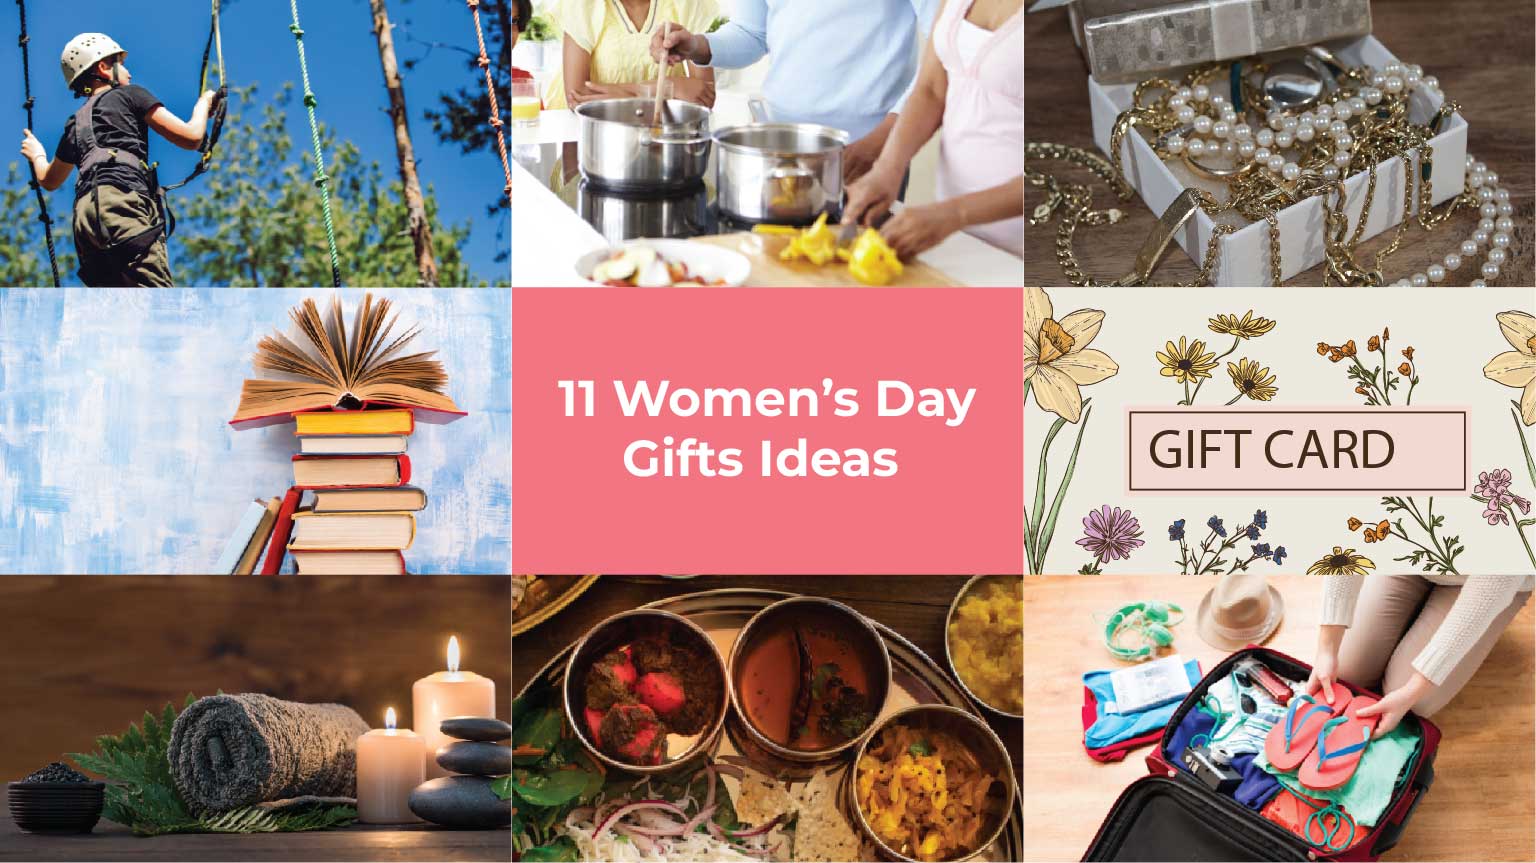 10+ Best Corporate Gifts for Women's Day to Give in 2022